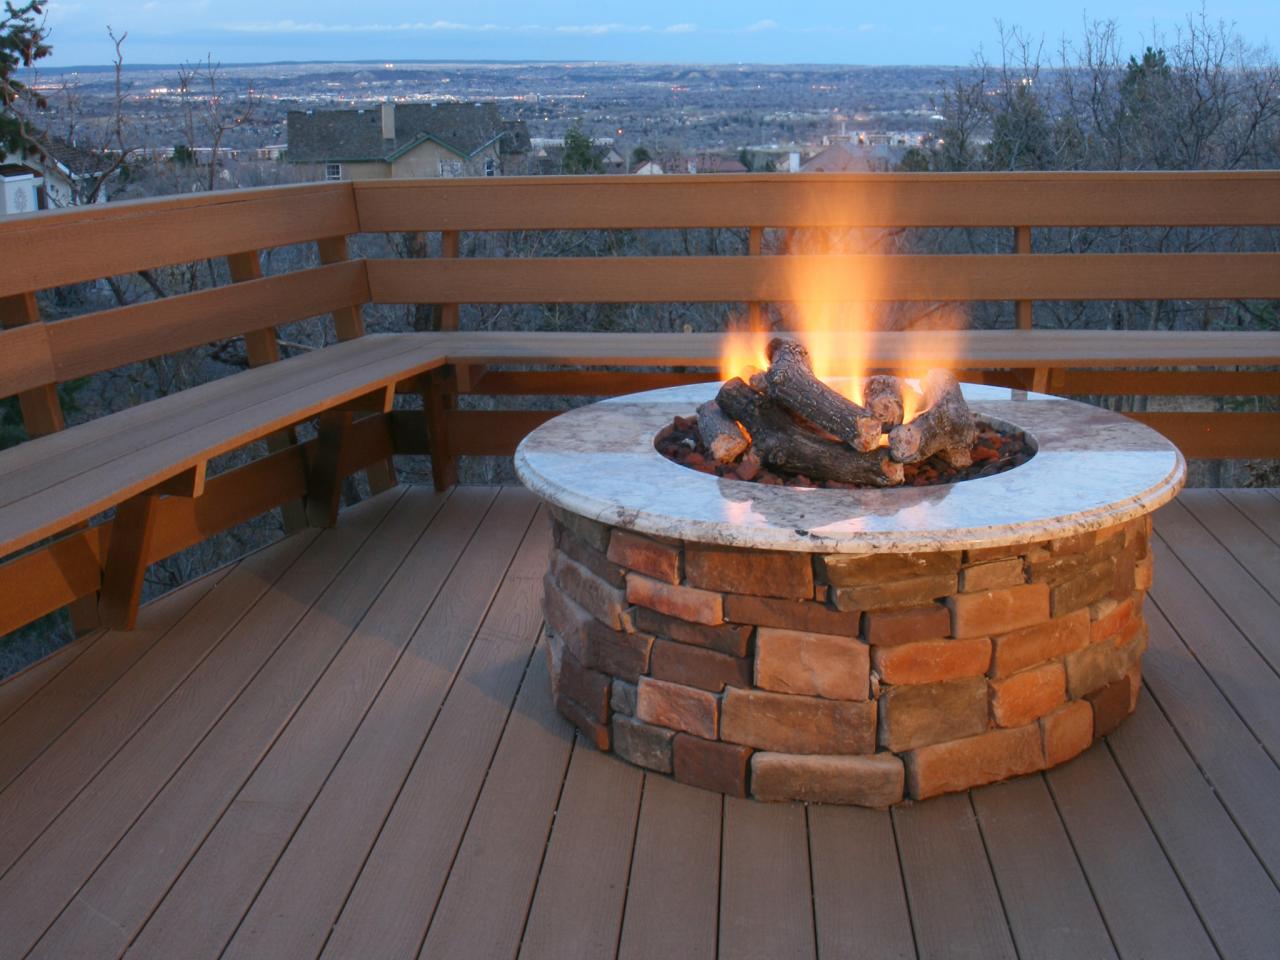 Brick And Concrete Fire Pits - Can I Put A Fire Pit On My Concrete Patio